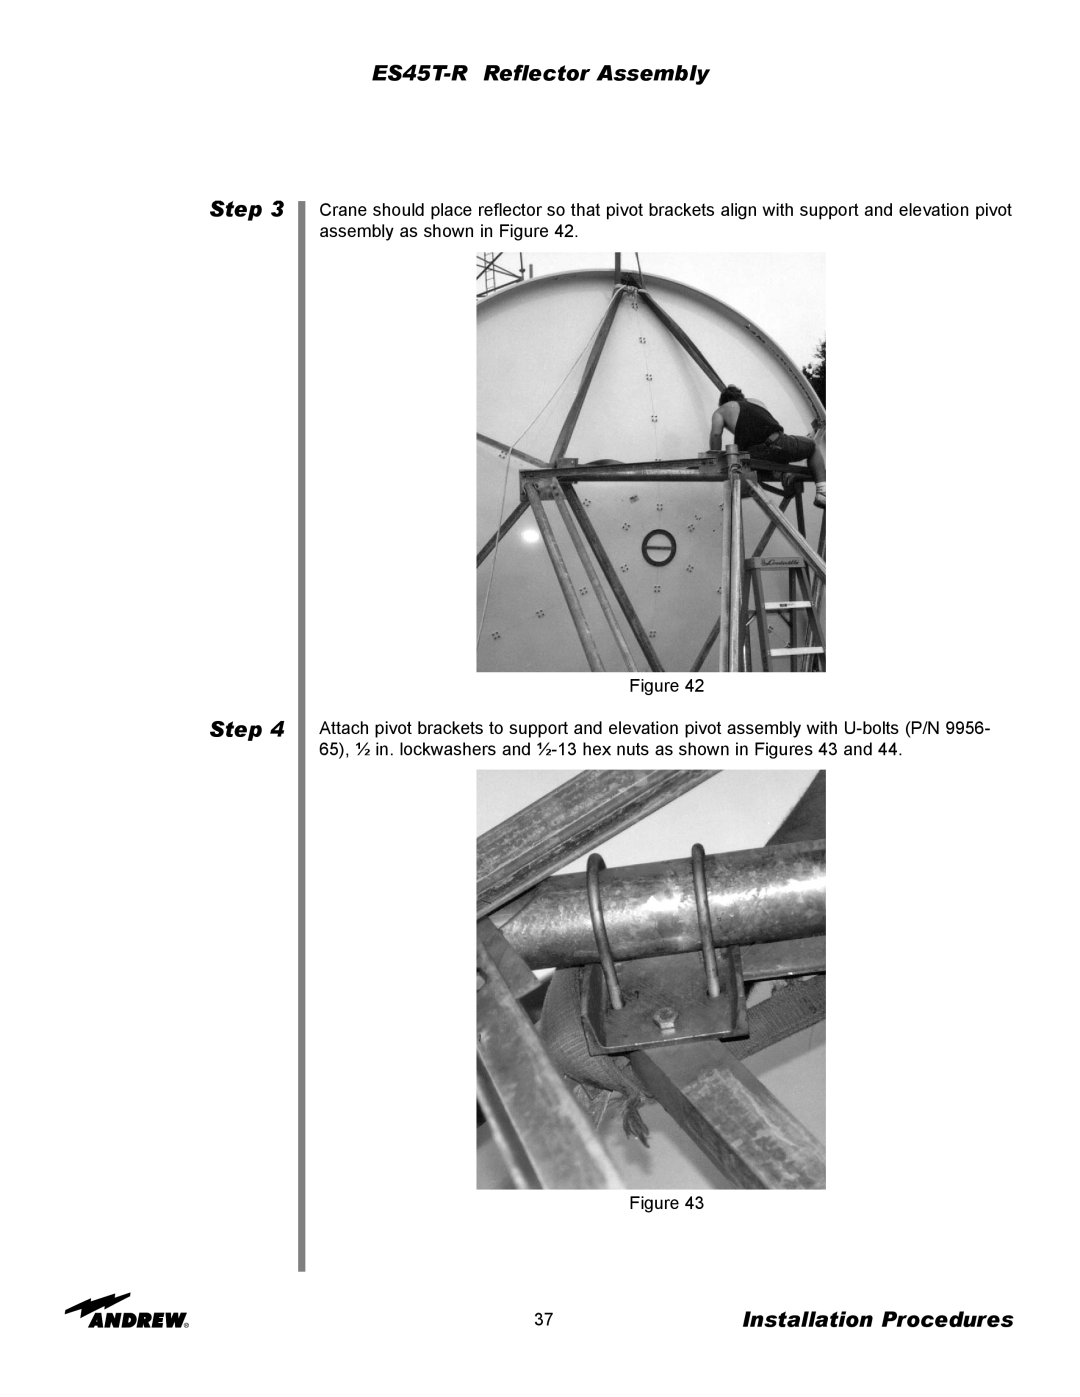 Andrew manual ES45T-RReflector Assembly, Step Step, Installation Procedures 